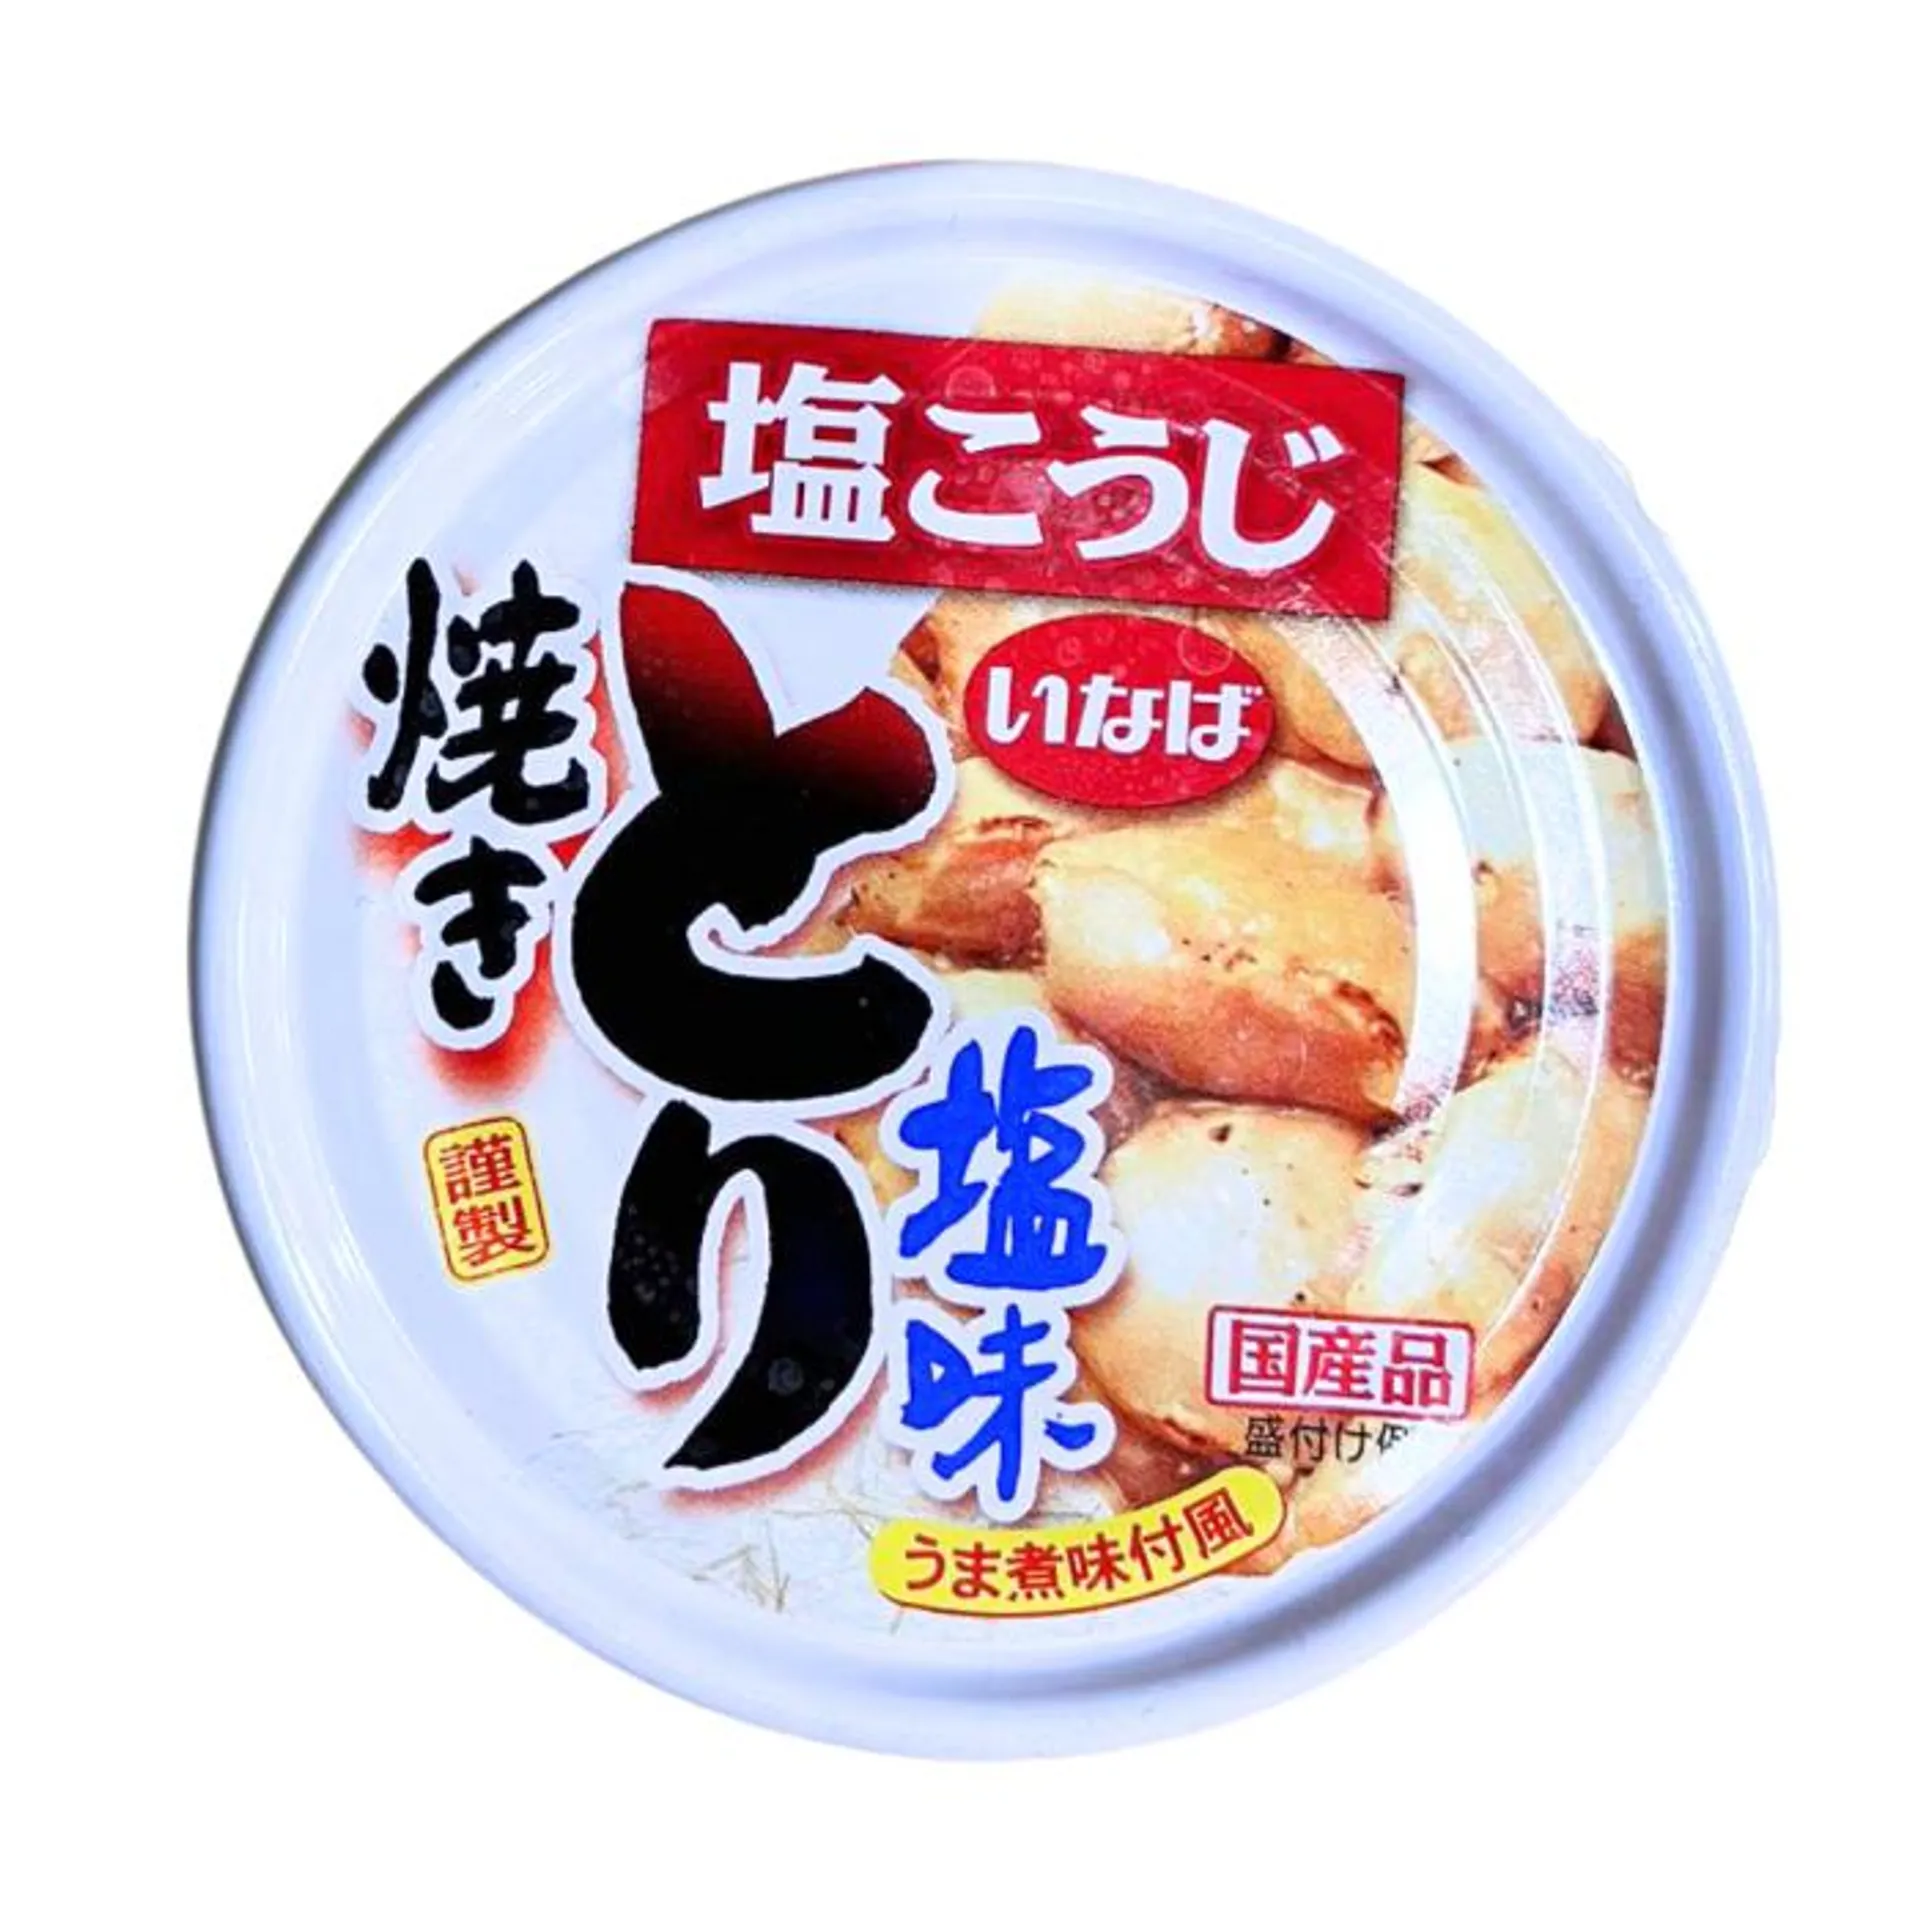 INABA FOODS / TORISHIO FLAVOR / CANNED COOKED CHICKEN 65g